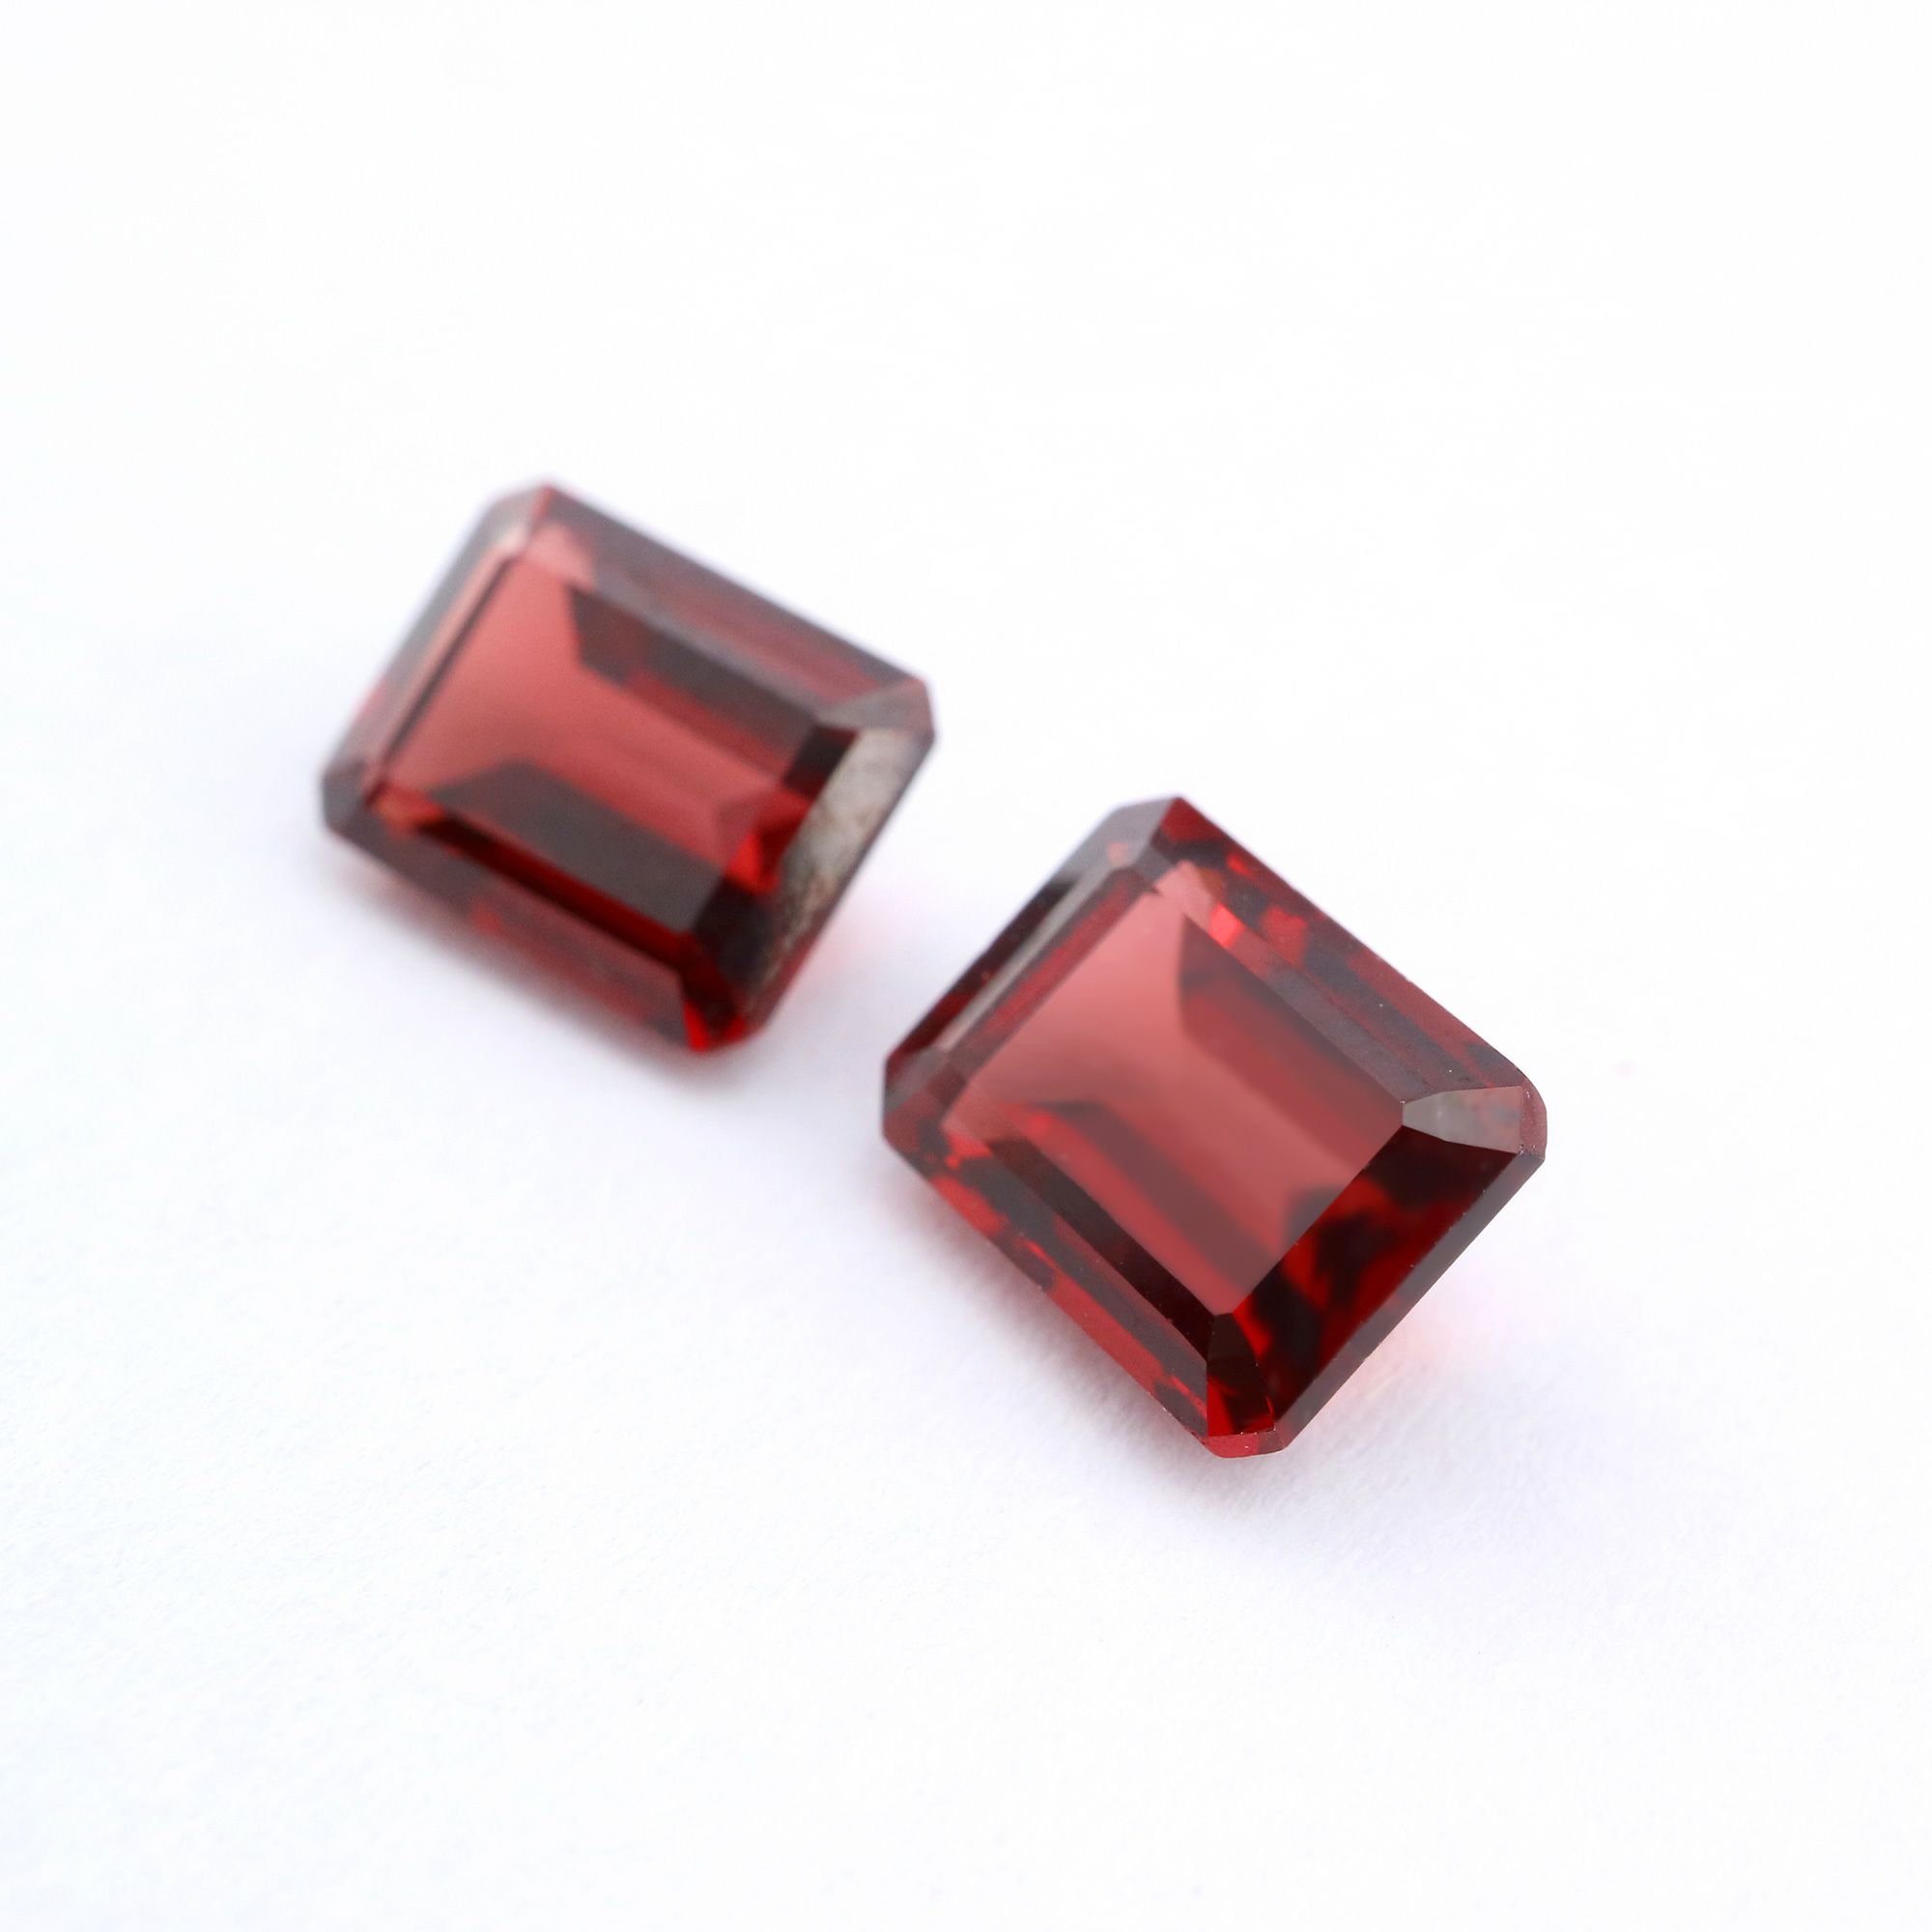 1Pcs Natural Red Garnet January Birthstone Emerald Cut Faceted Loose Gemstone Nature Semi Precious Stone DIY Jewelry Supplies 4170008 - Click Image to Close